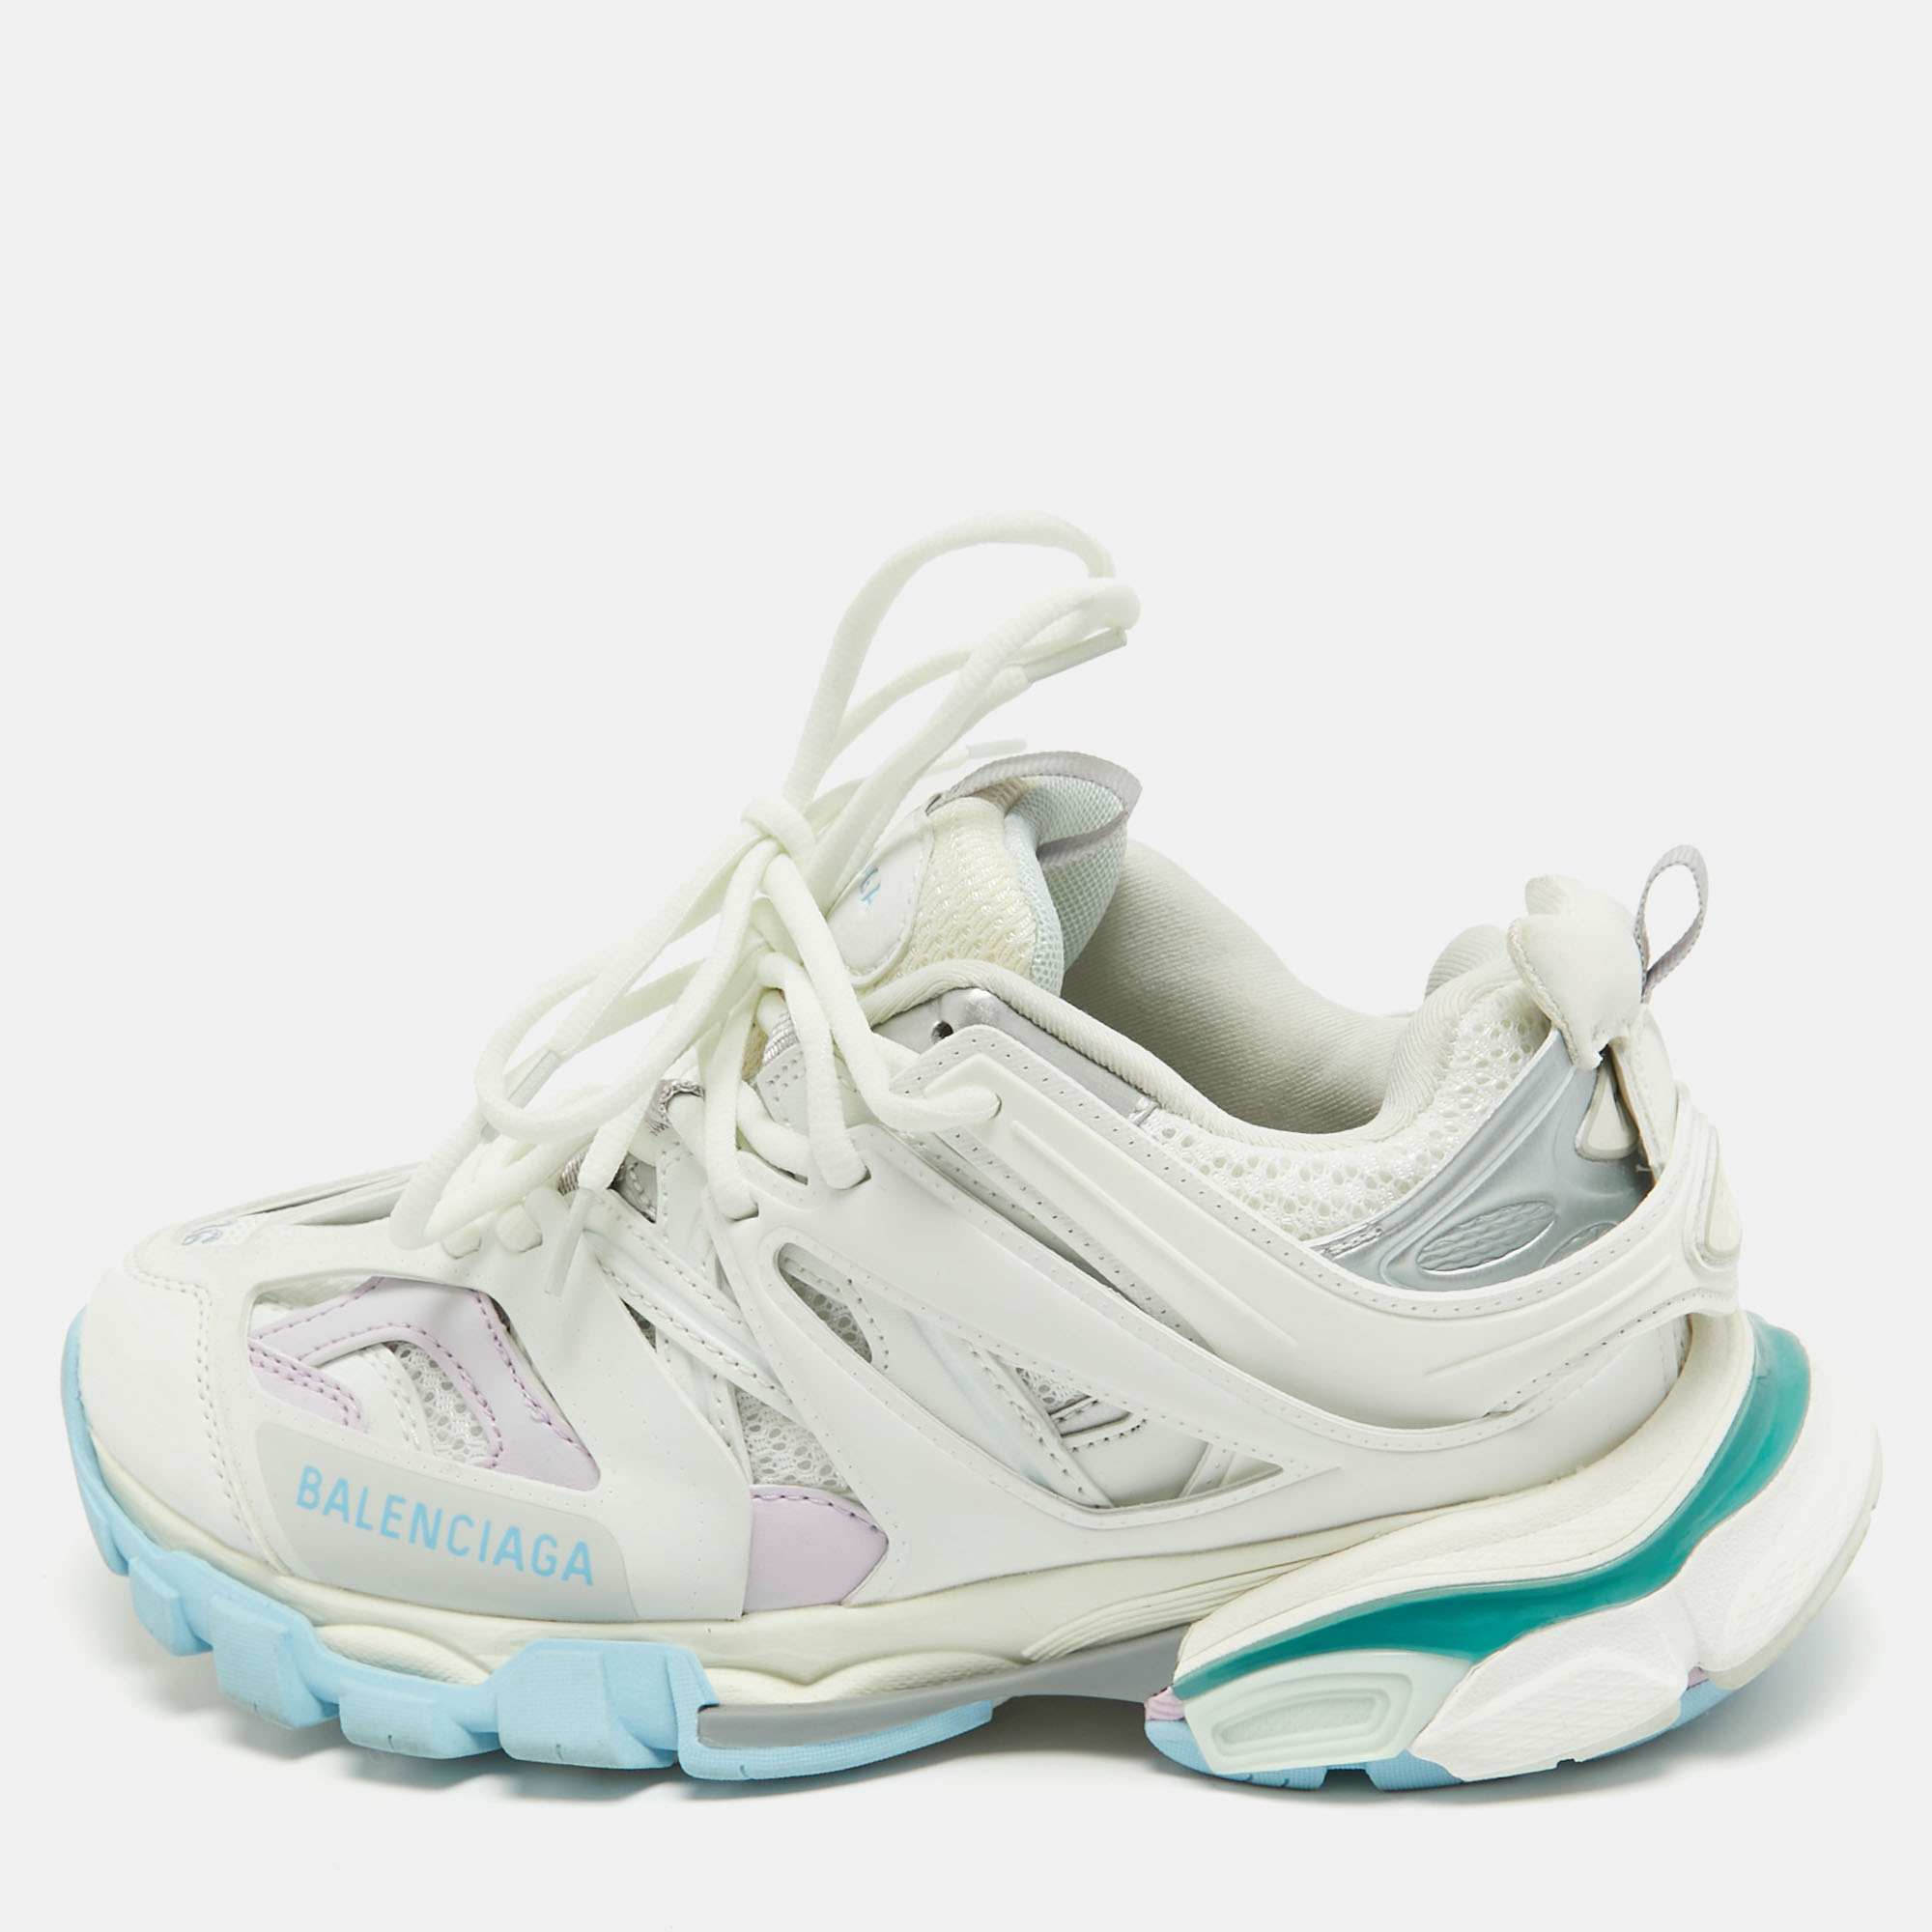 

Balenciaga Multicolor Leather and Mesh Track Sneakers Size